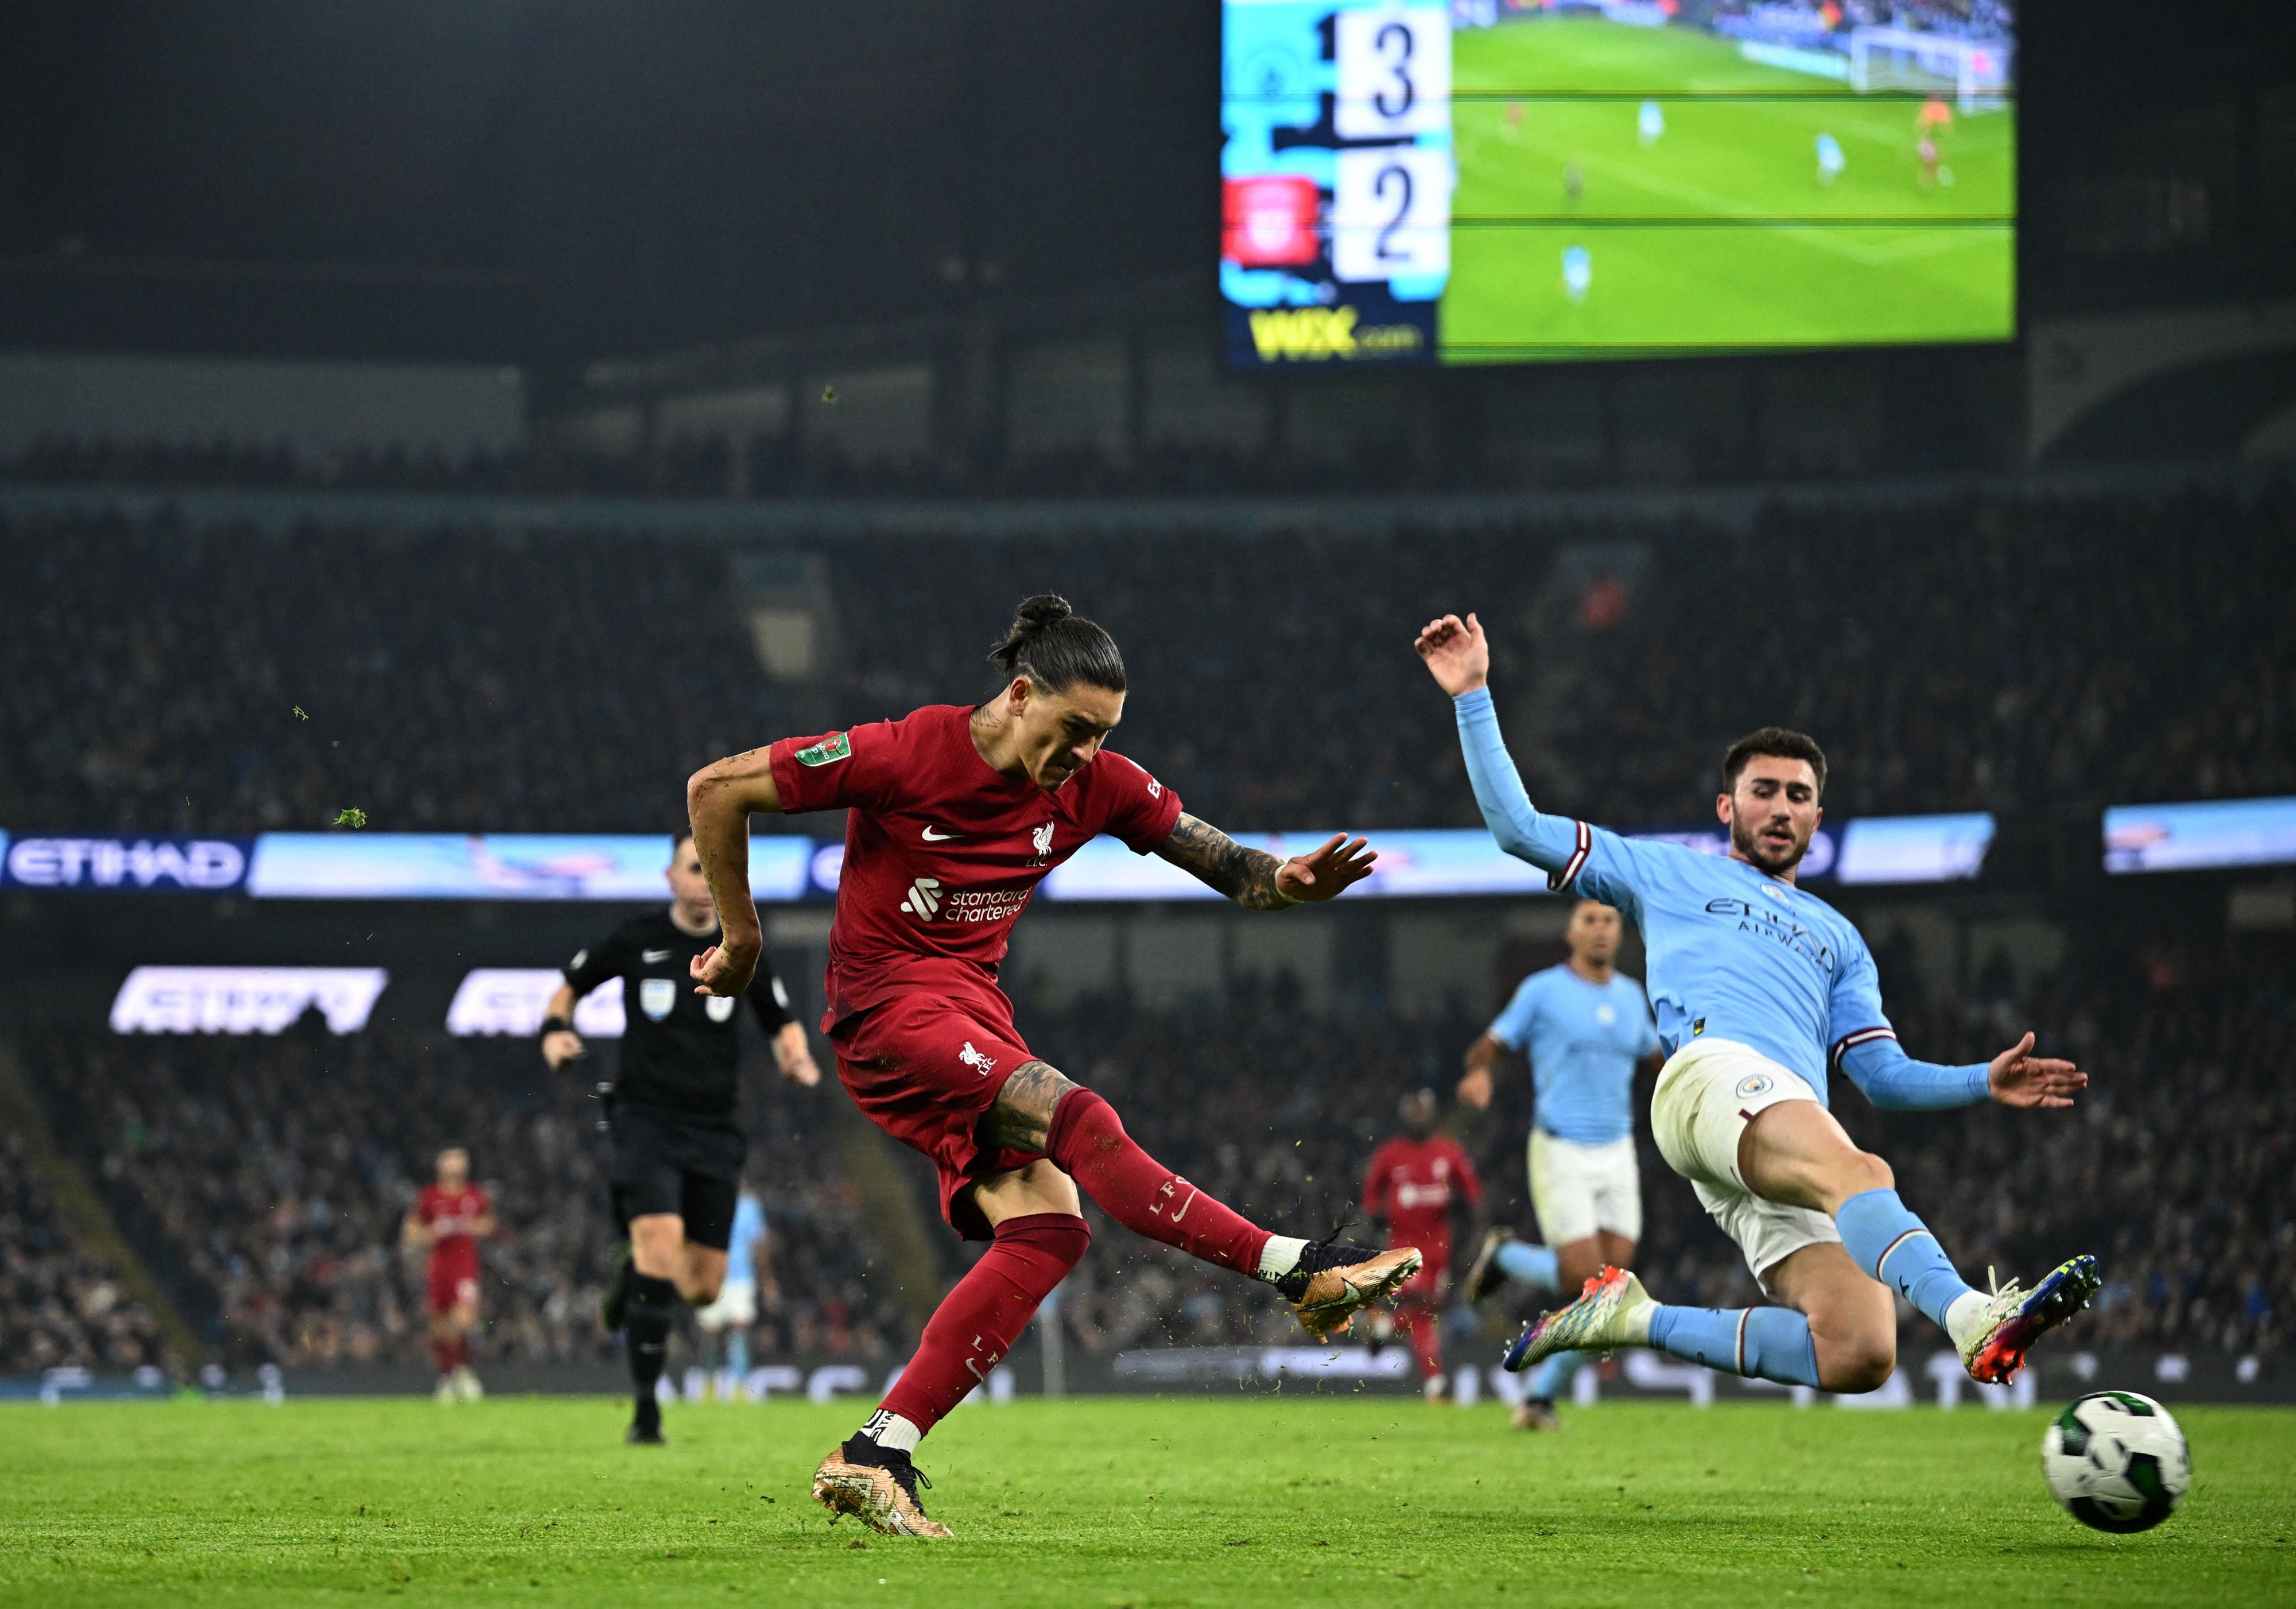 Liverpool face Manchester City in the Premier League